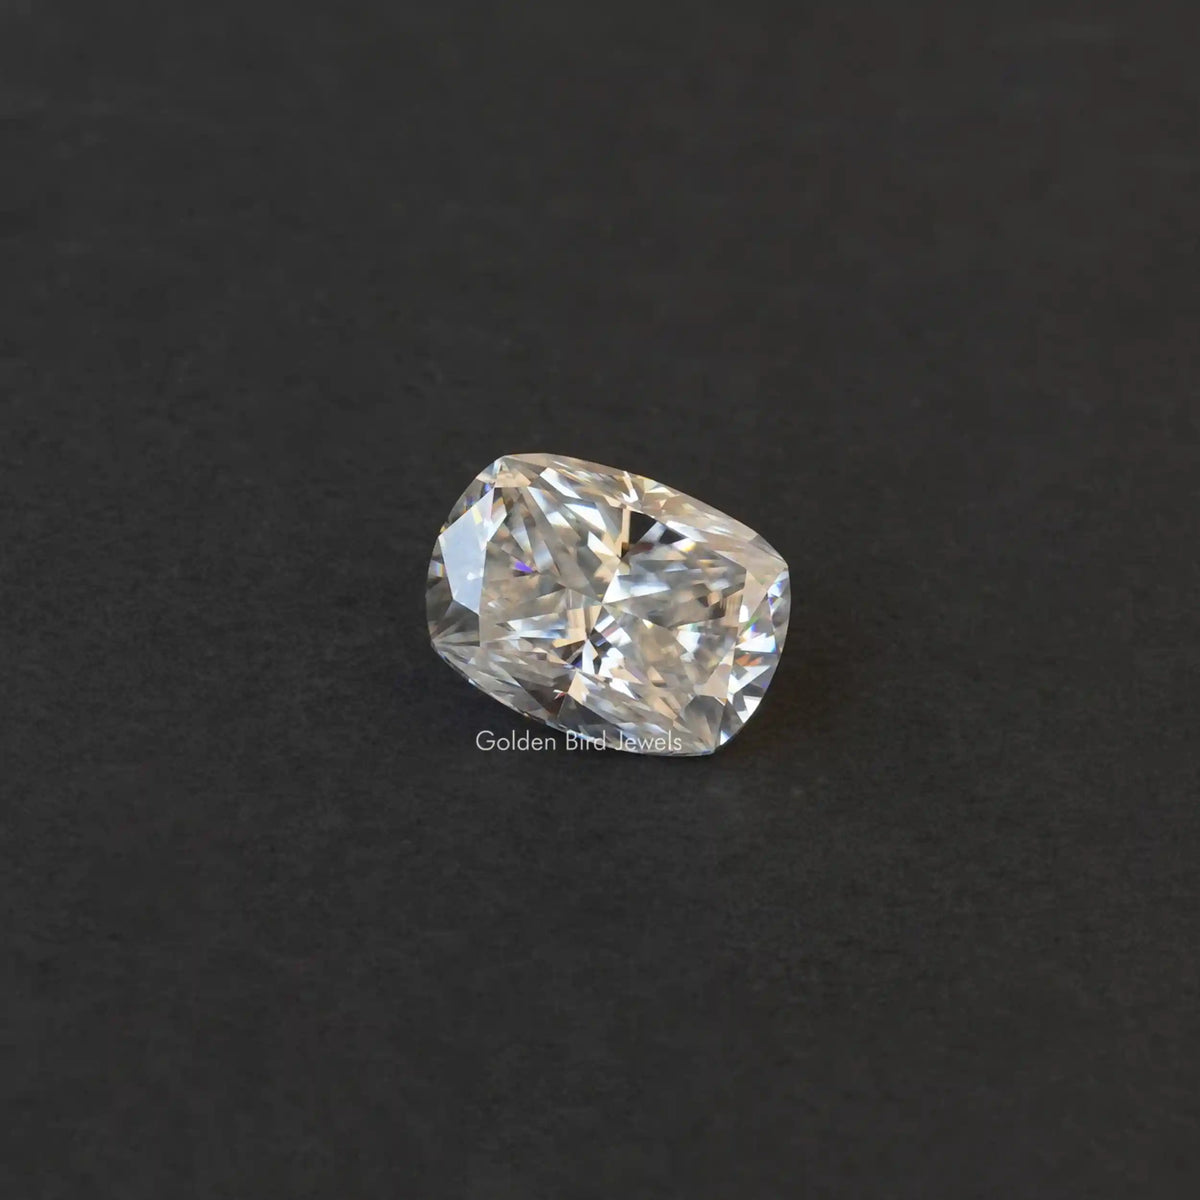 [Front view of crushed ice cushion cut loose moissanite]-[Golden Bird Jewels]